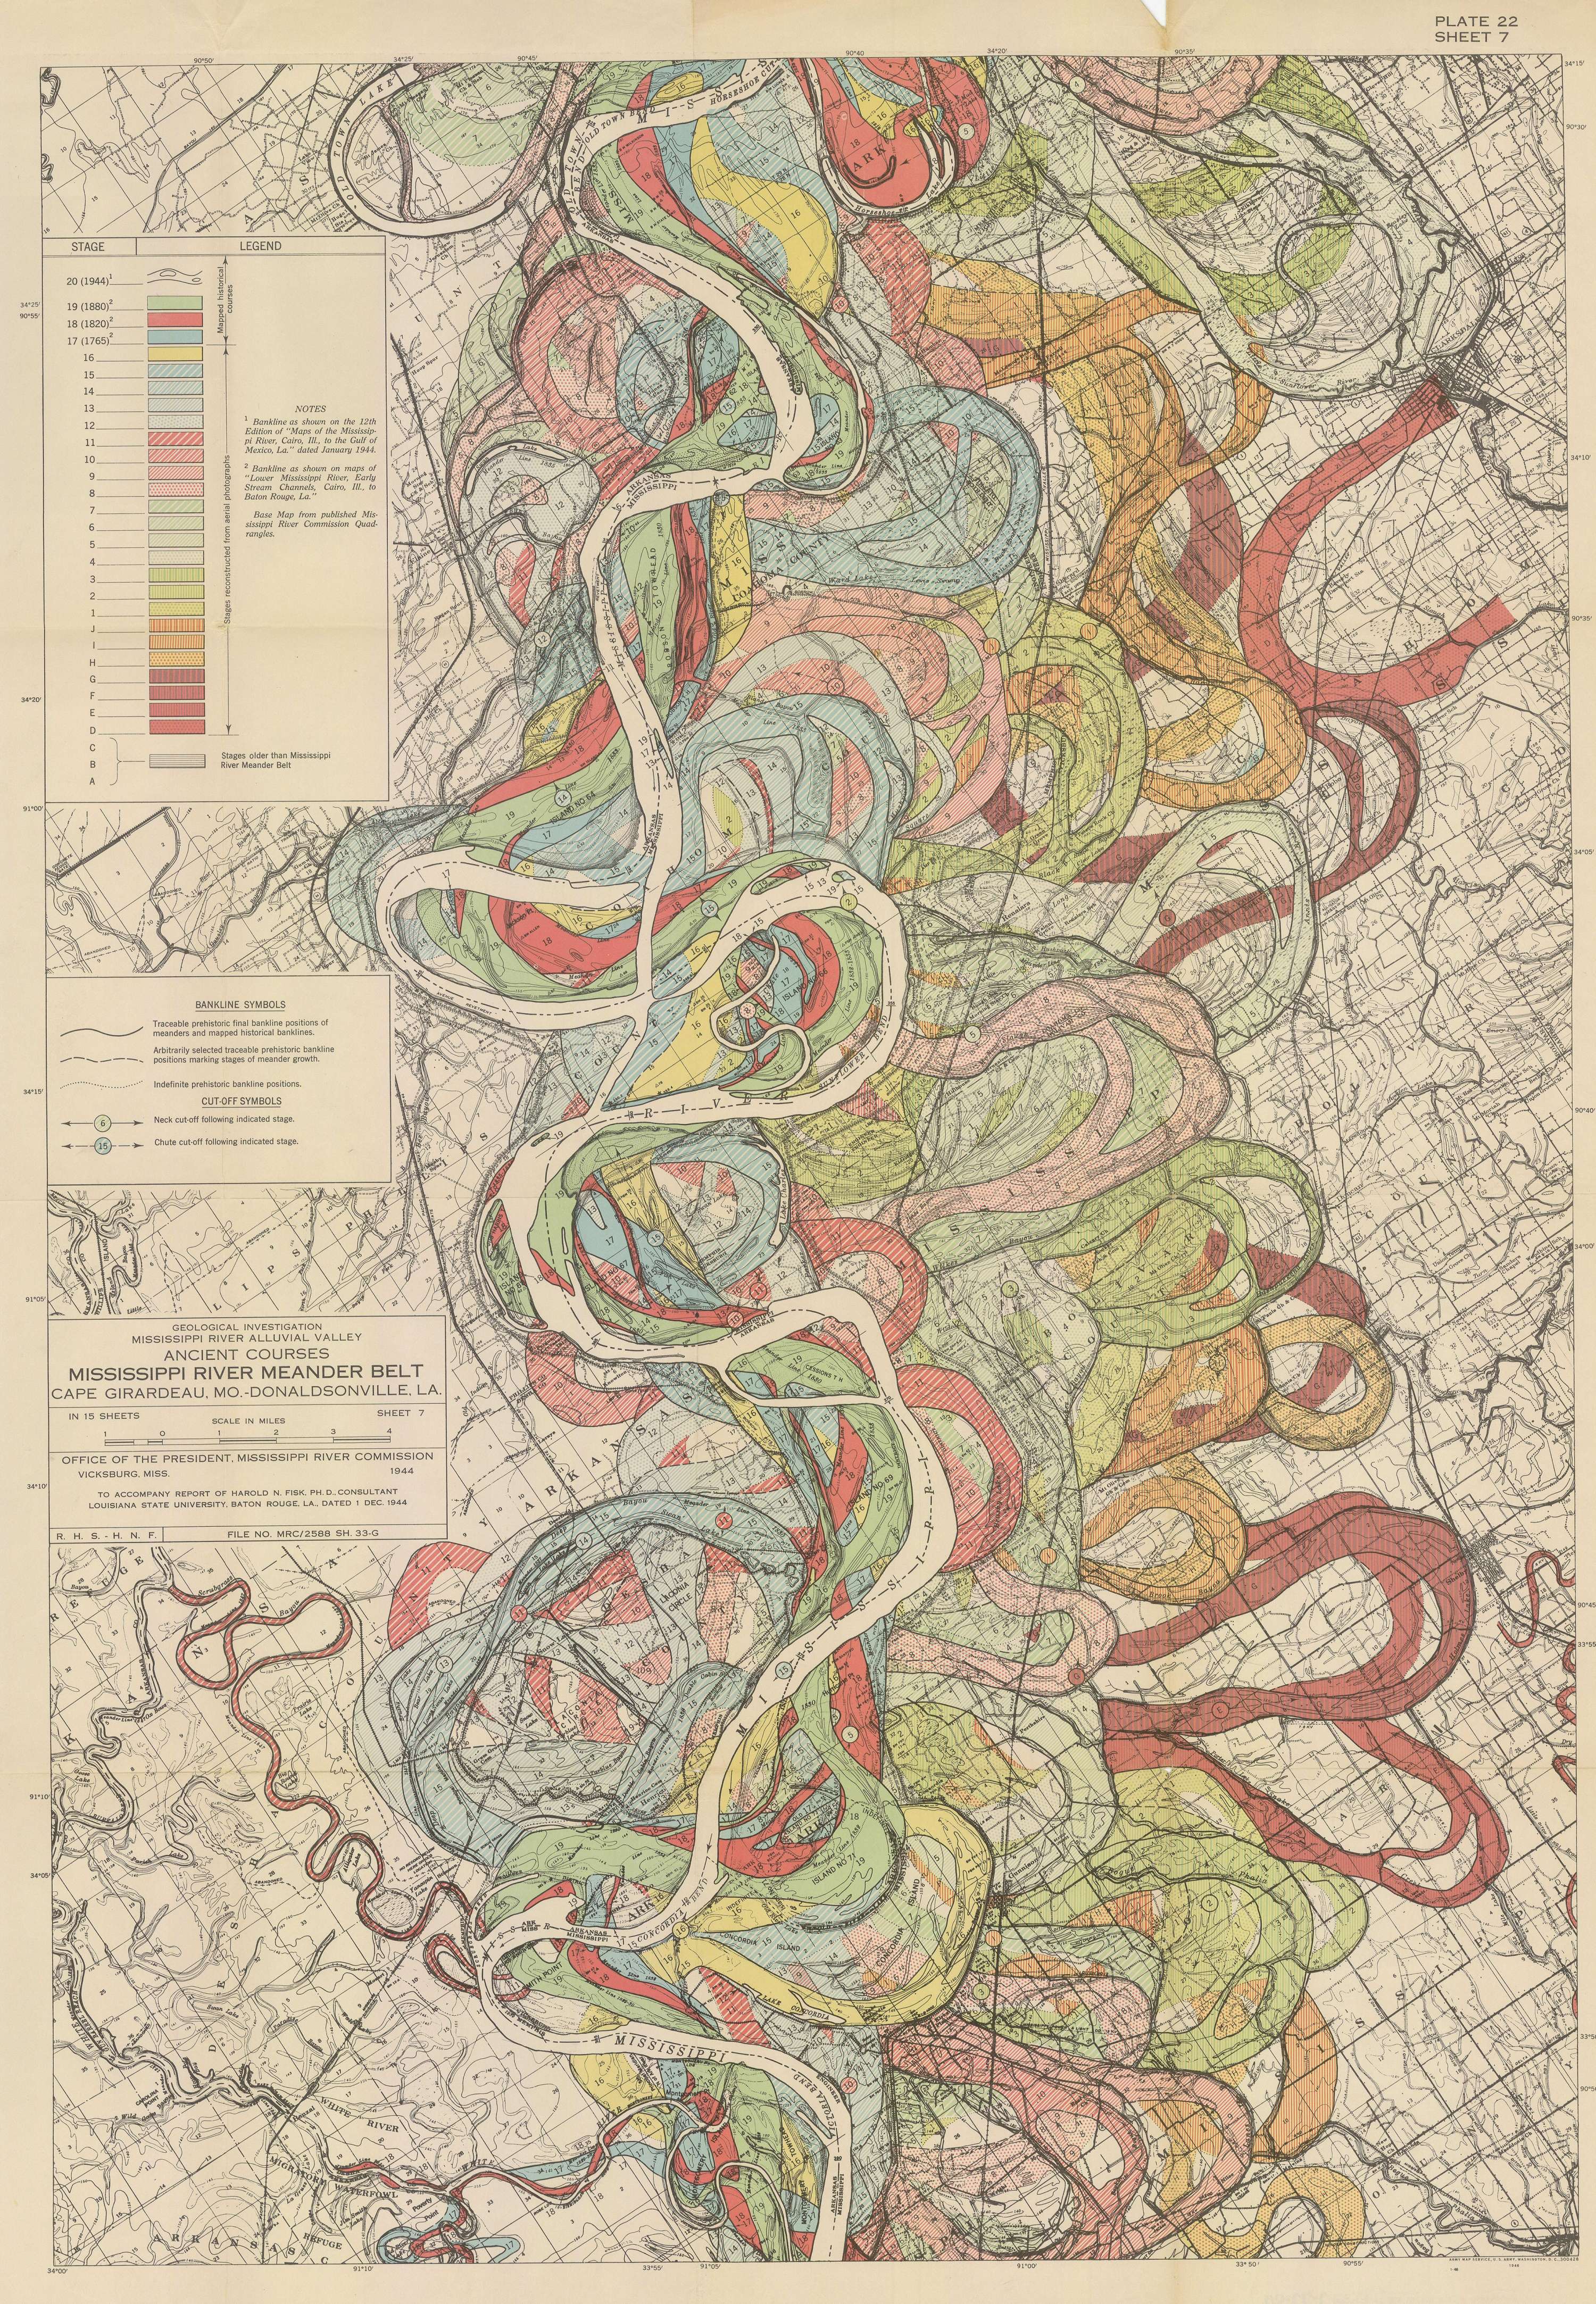 “Alluvial Valley of the Lower Mississippi River by Harold Fisk, 1944” courtesy of Atlas of Places